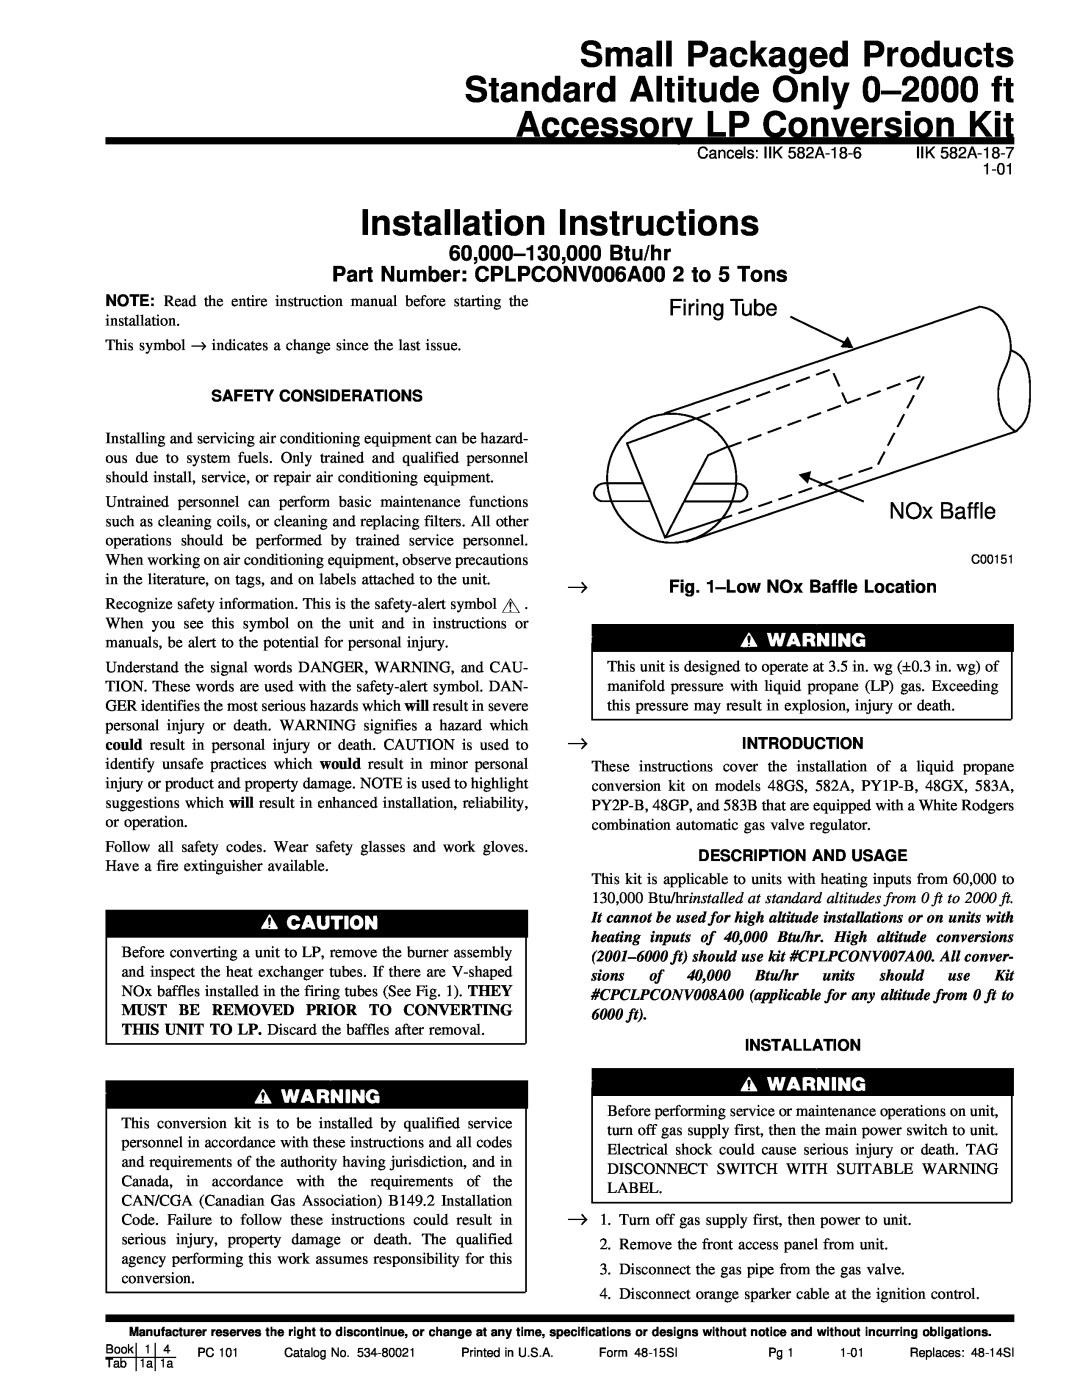 Carrier CPLPCONV006A00 installation instructions LowNOx Baffle Location, Installation Instructions, Firing Tube 